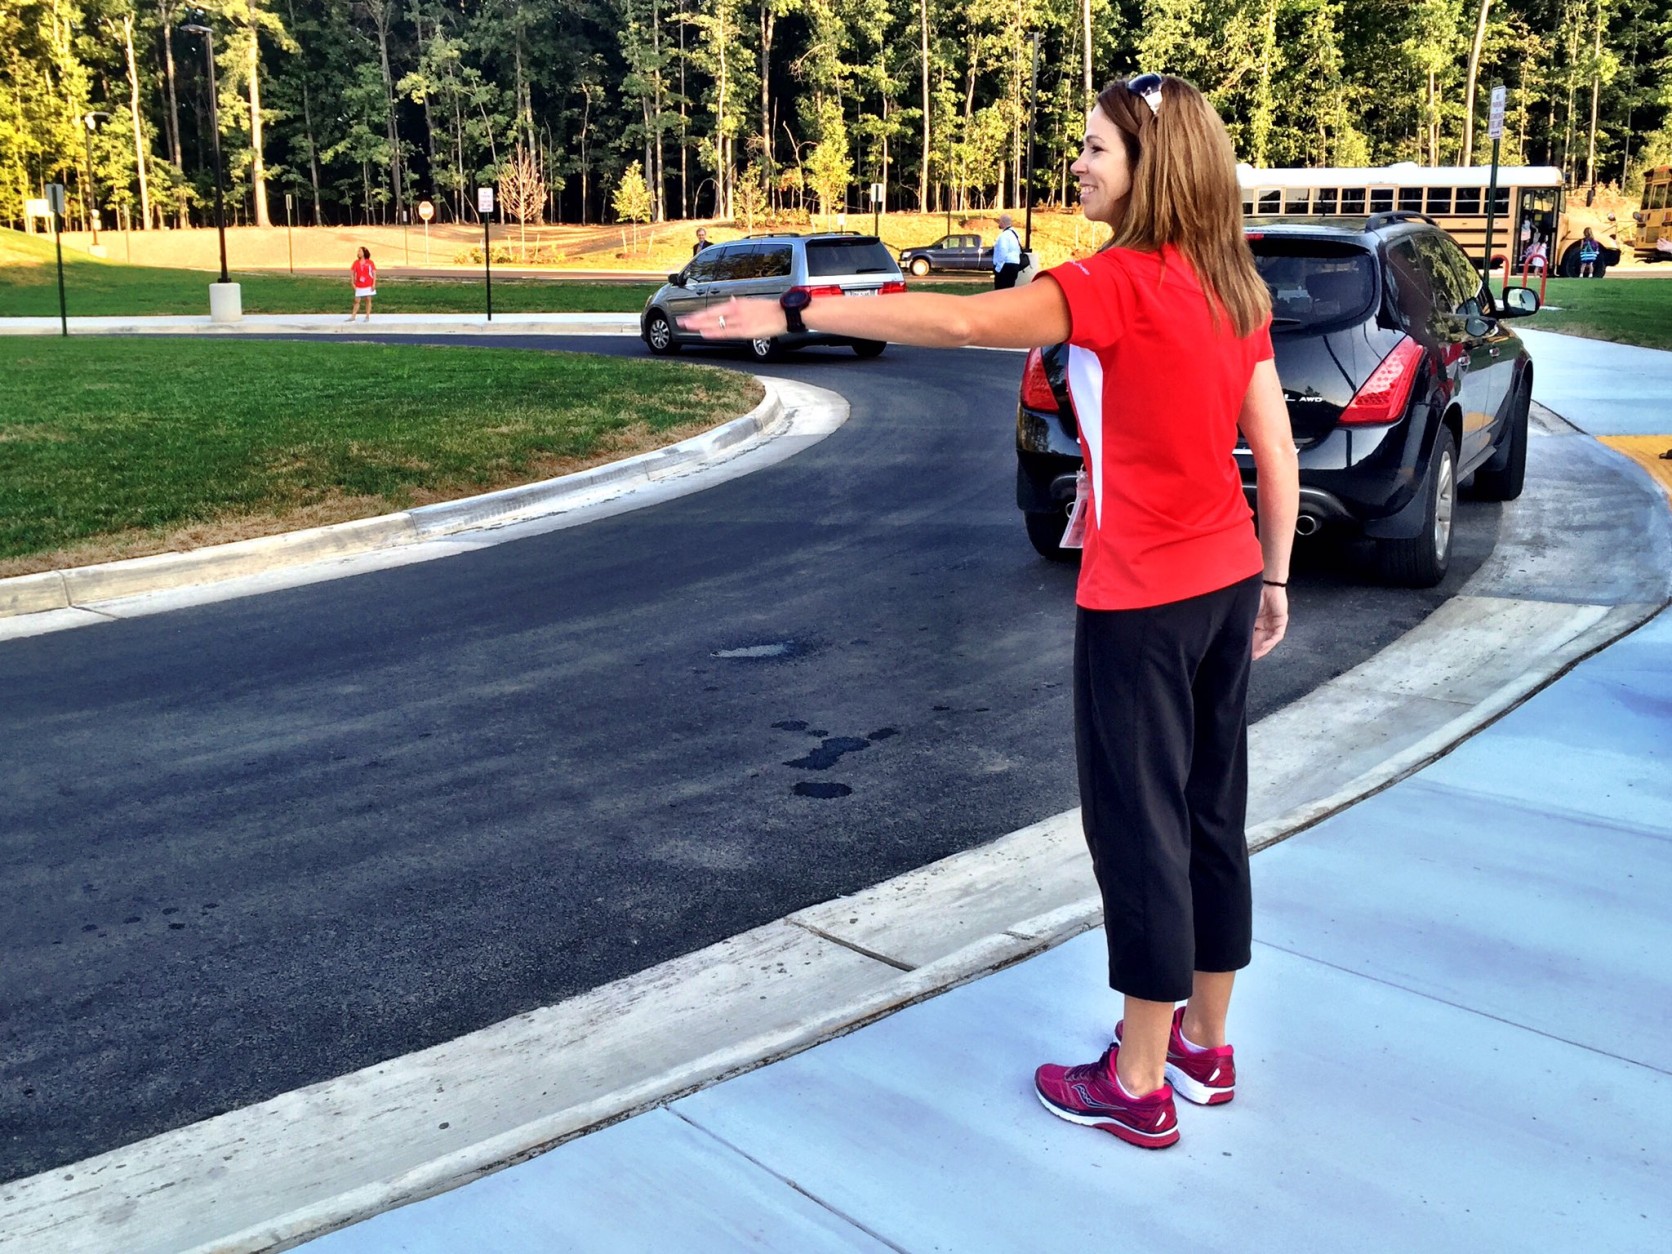 Physical education teacher Beth Ciccone directs in the dropoff lane on the first day of school at Madison's Trust Elementary, in Loudoun County. (WTOP/Neal Augenstein)